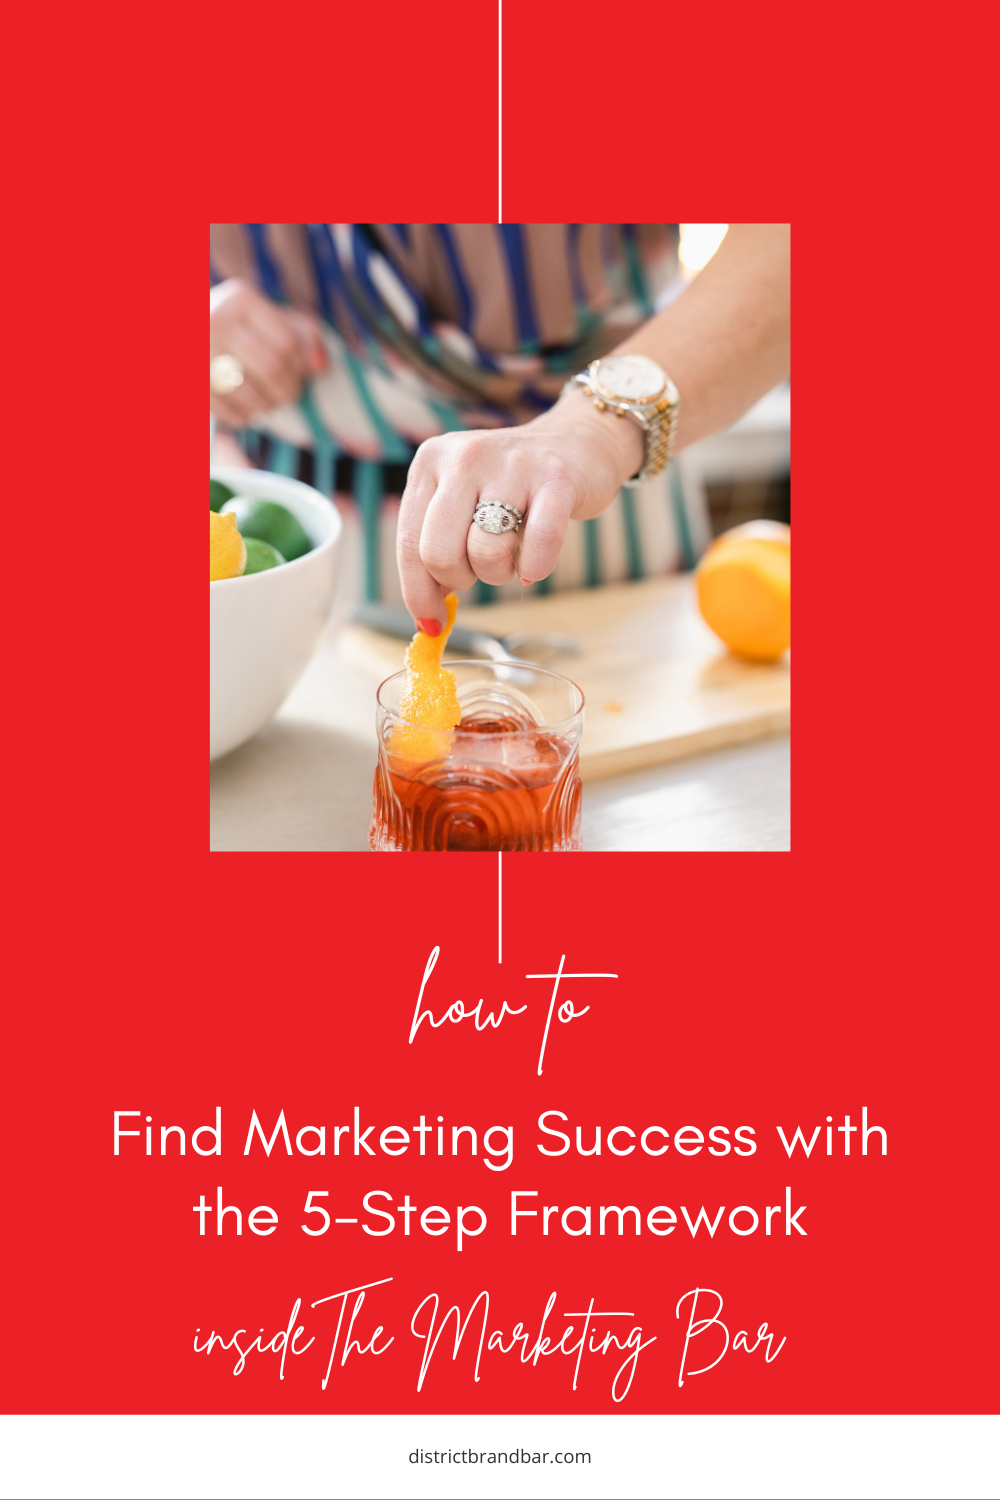 How to Find Marketing Success with This 5-Step Framework